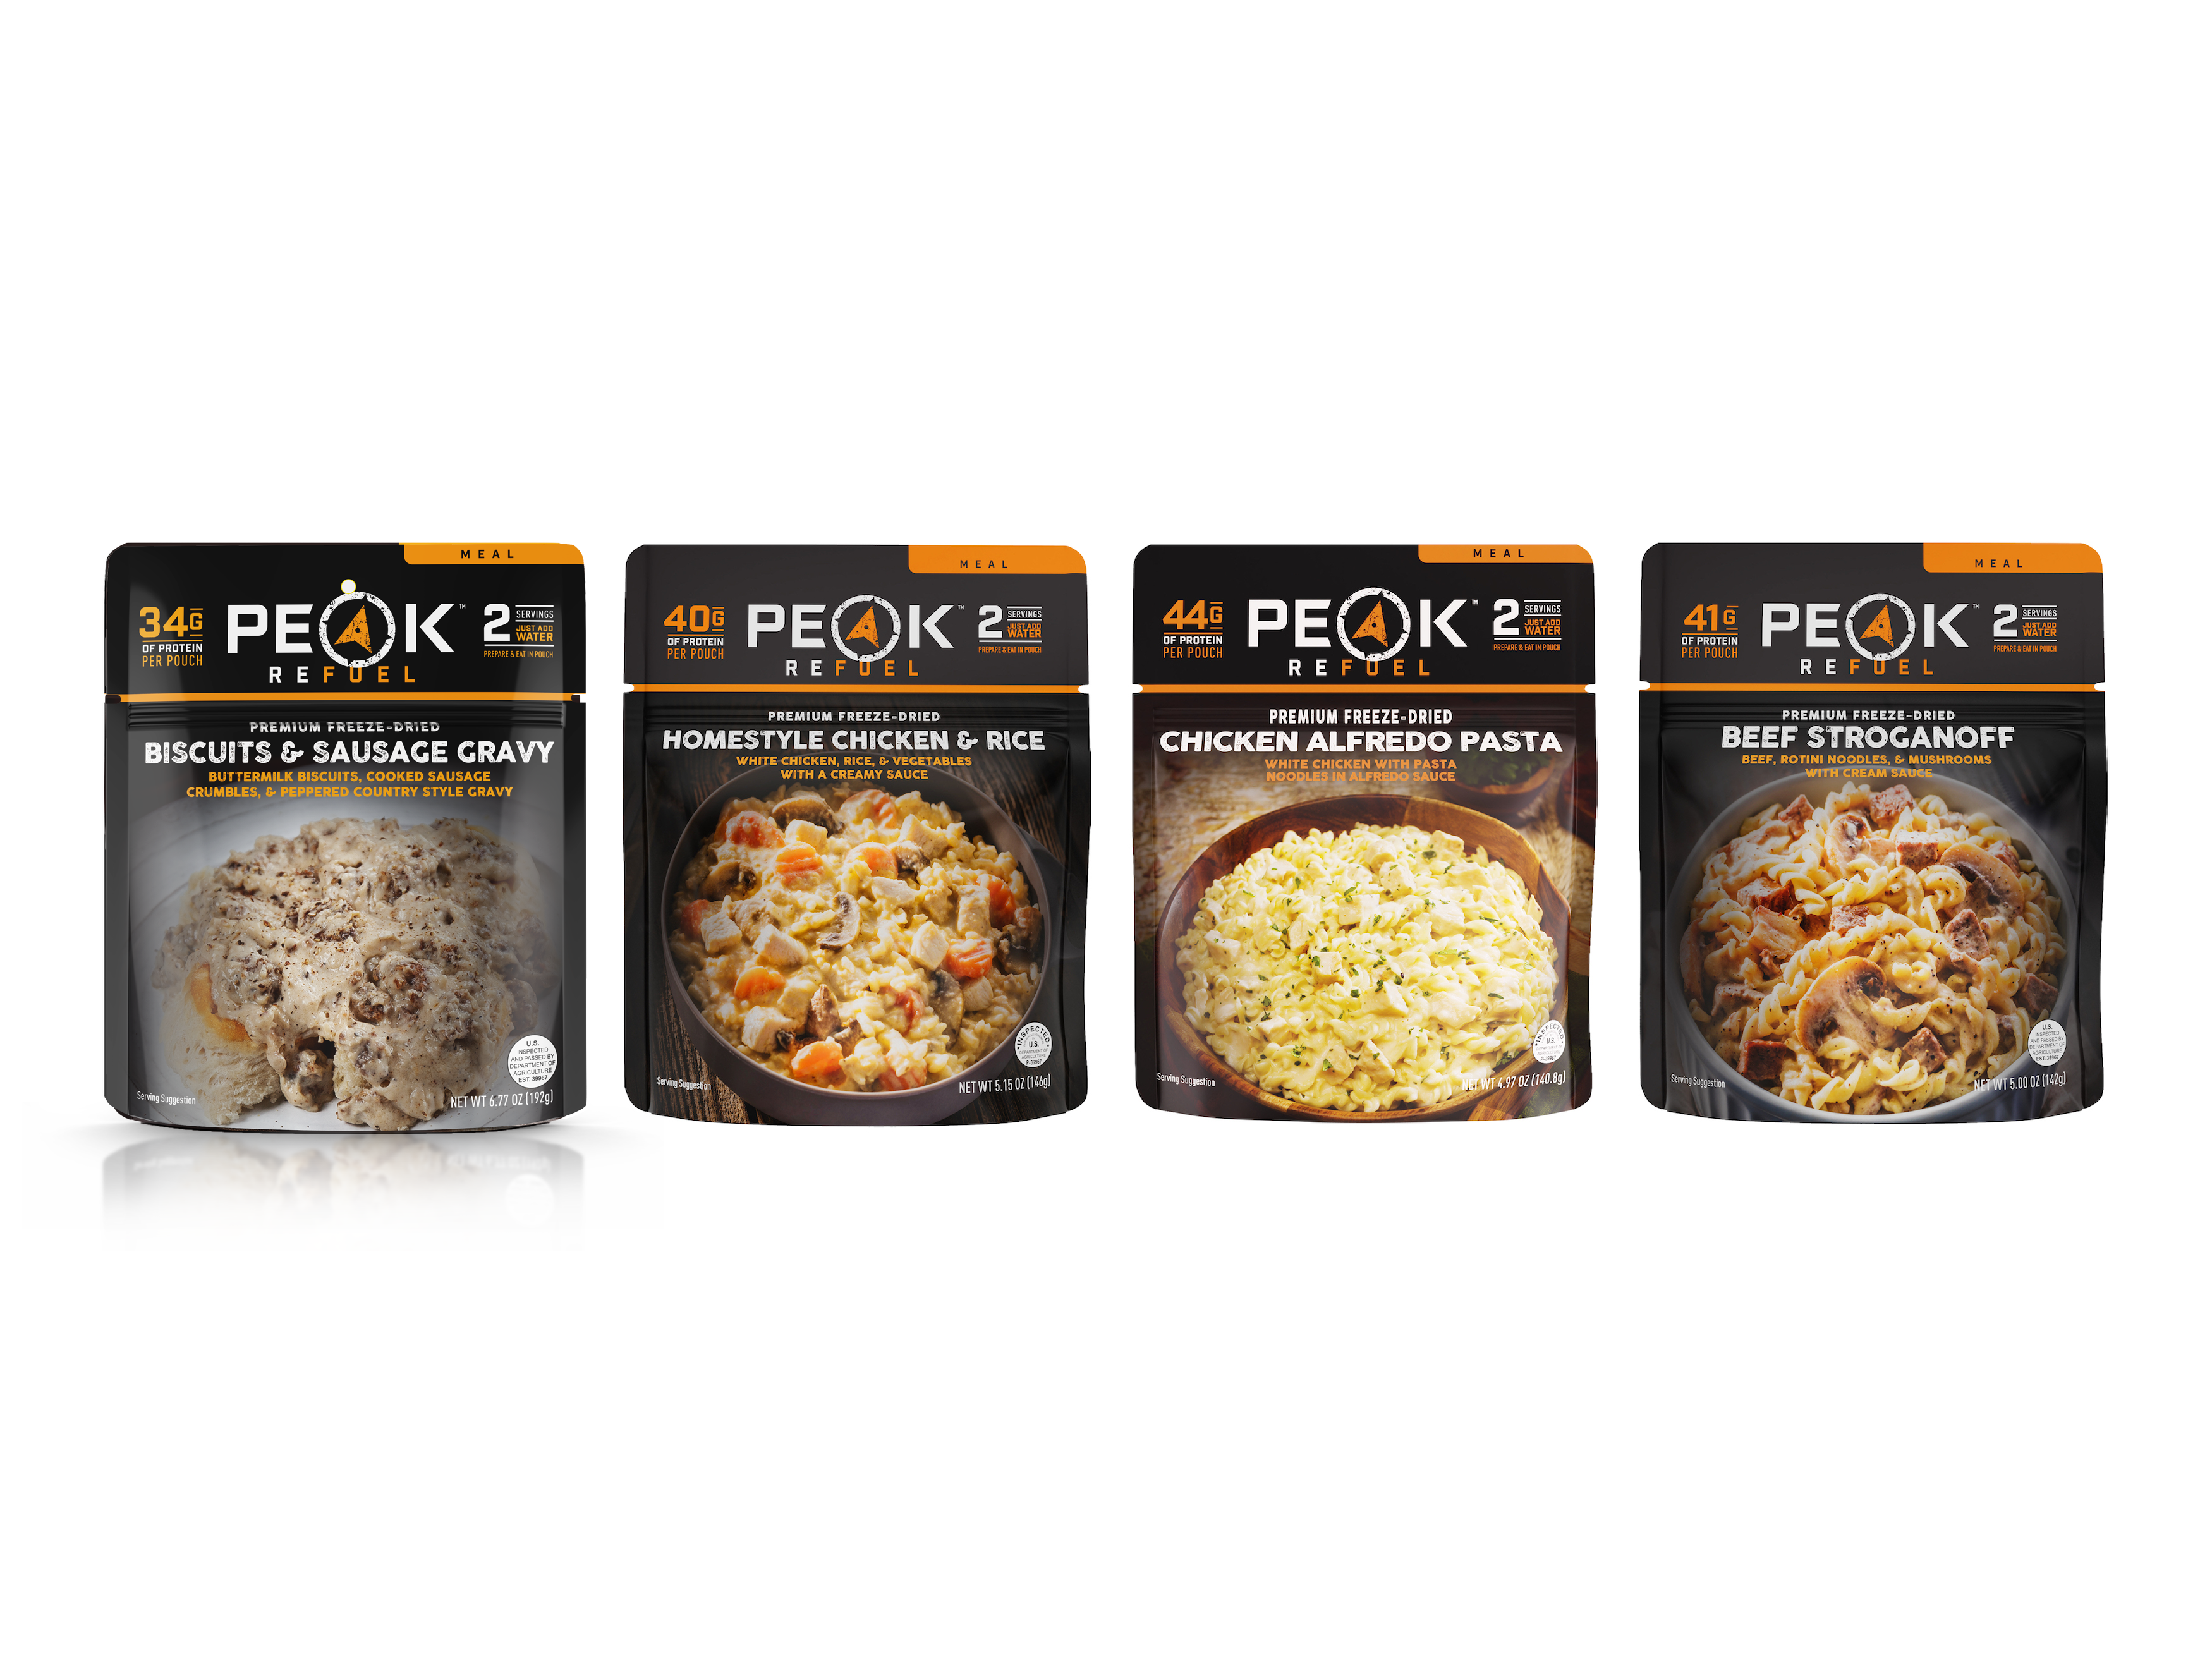 A group of prepackaged meals on a table, including a bowl of noodles with chicken and herbs, and a bowl of pasta with meat and mushrooms.